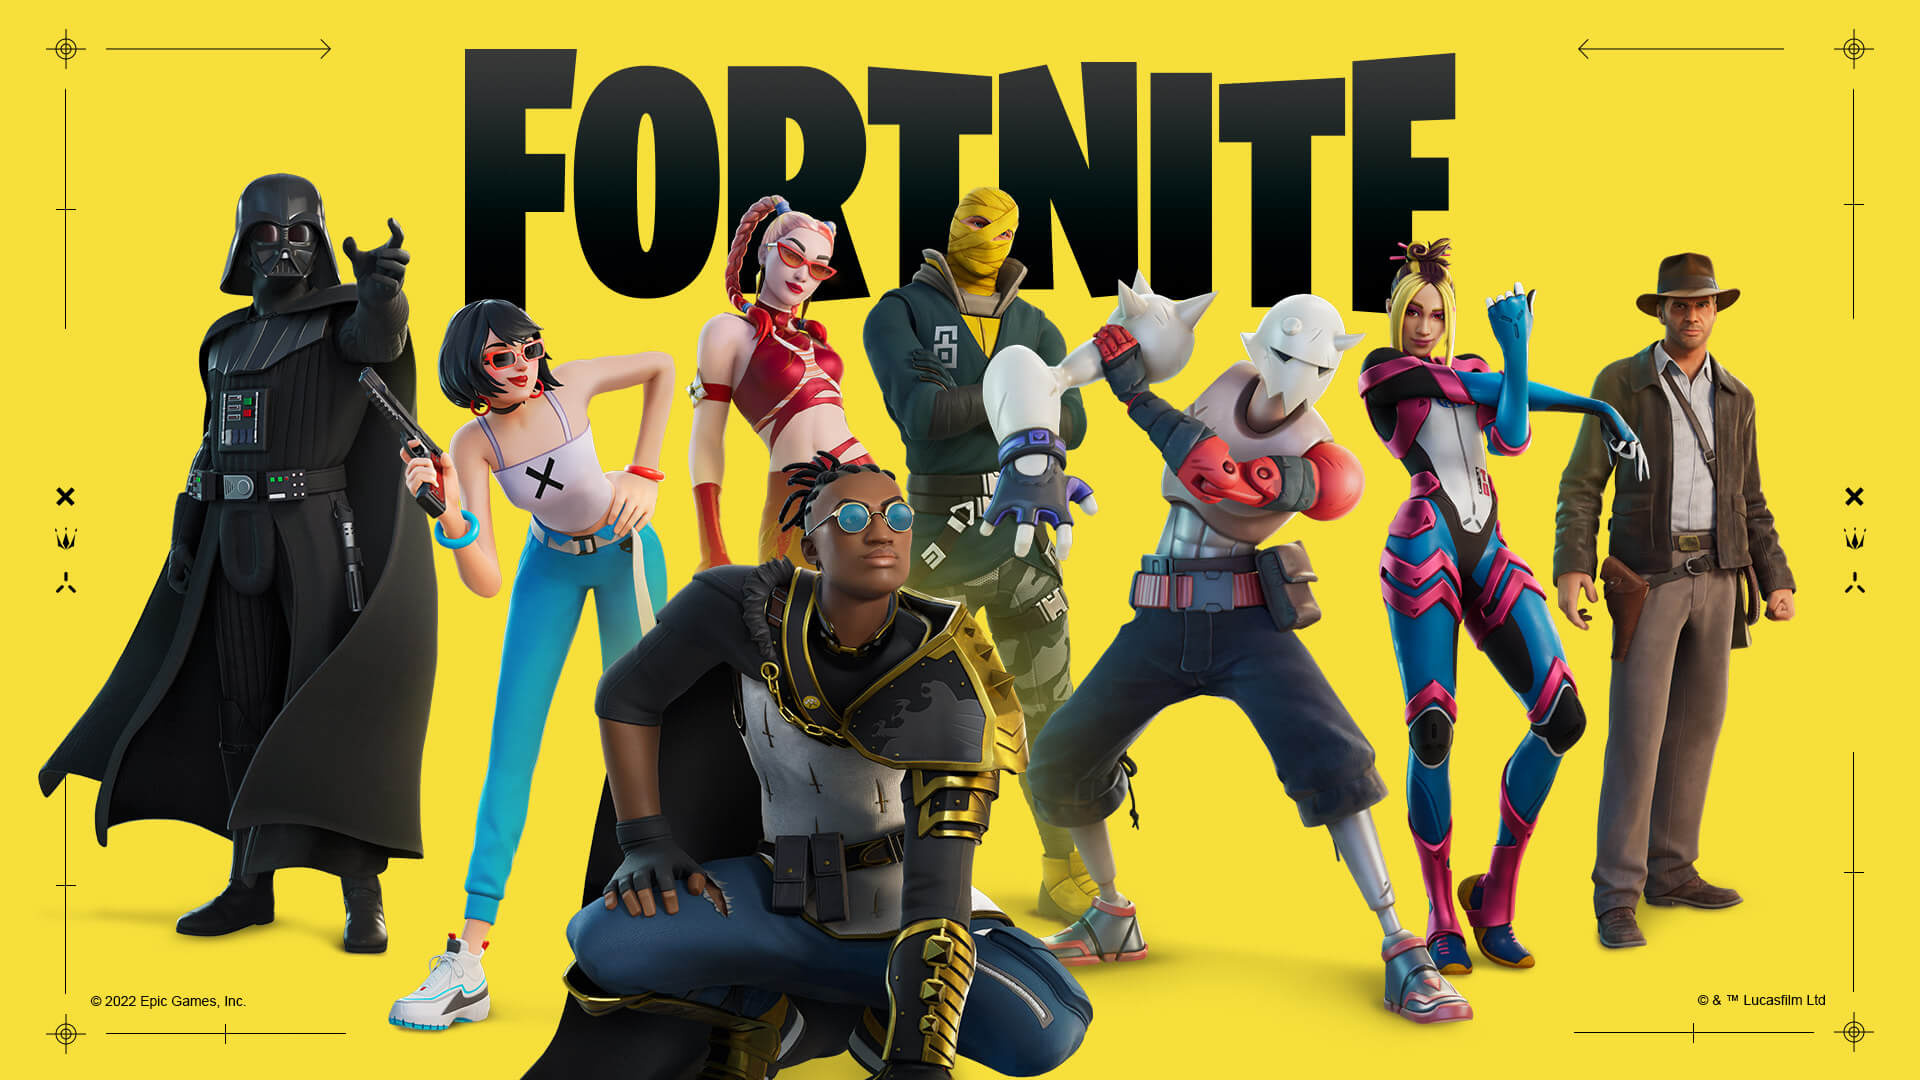 Epic Games, Fortnite free-to-play, Cross-platform game, Multiplayer experience, 1920x1080 Full HD Desktop